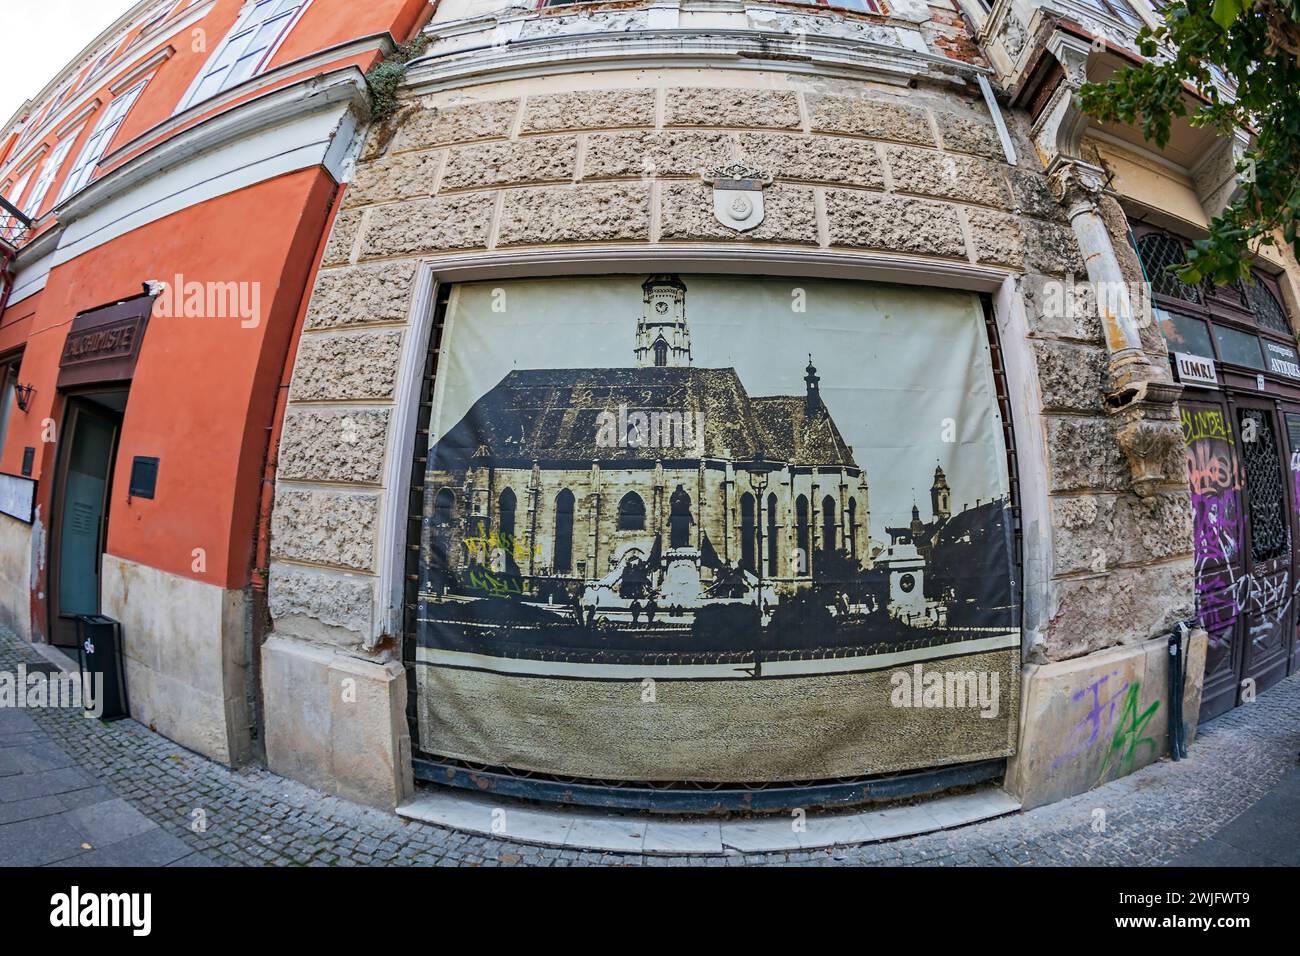 CLUJ-NAPOCA, ROMANIA - SEPTEMBER 20, 2020: Facade of a historic building located in the historic center, with banner in the form of photographs which Stock Photo